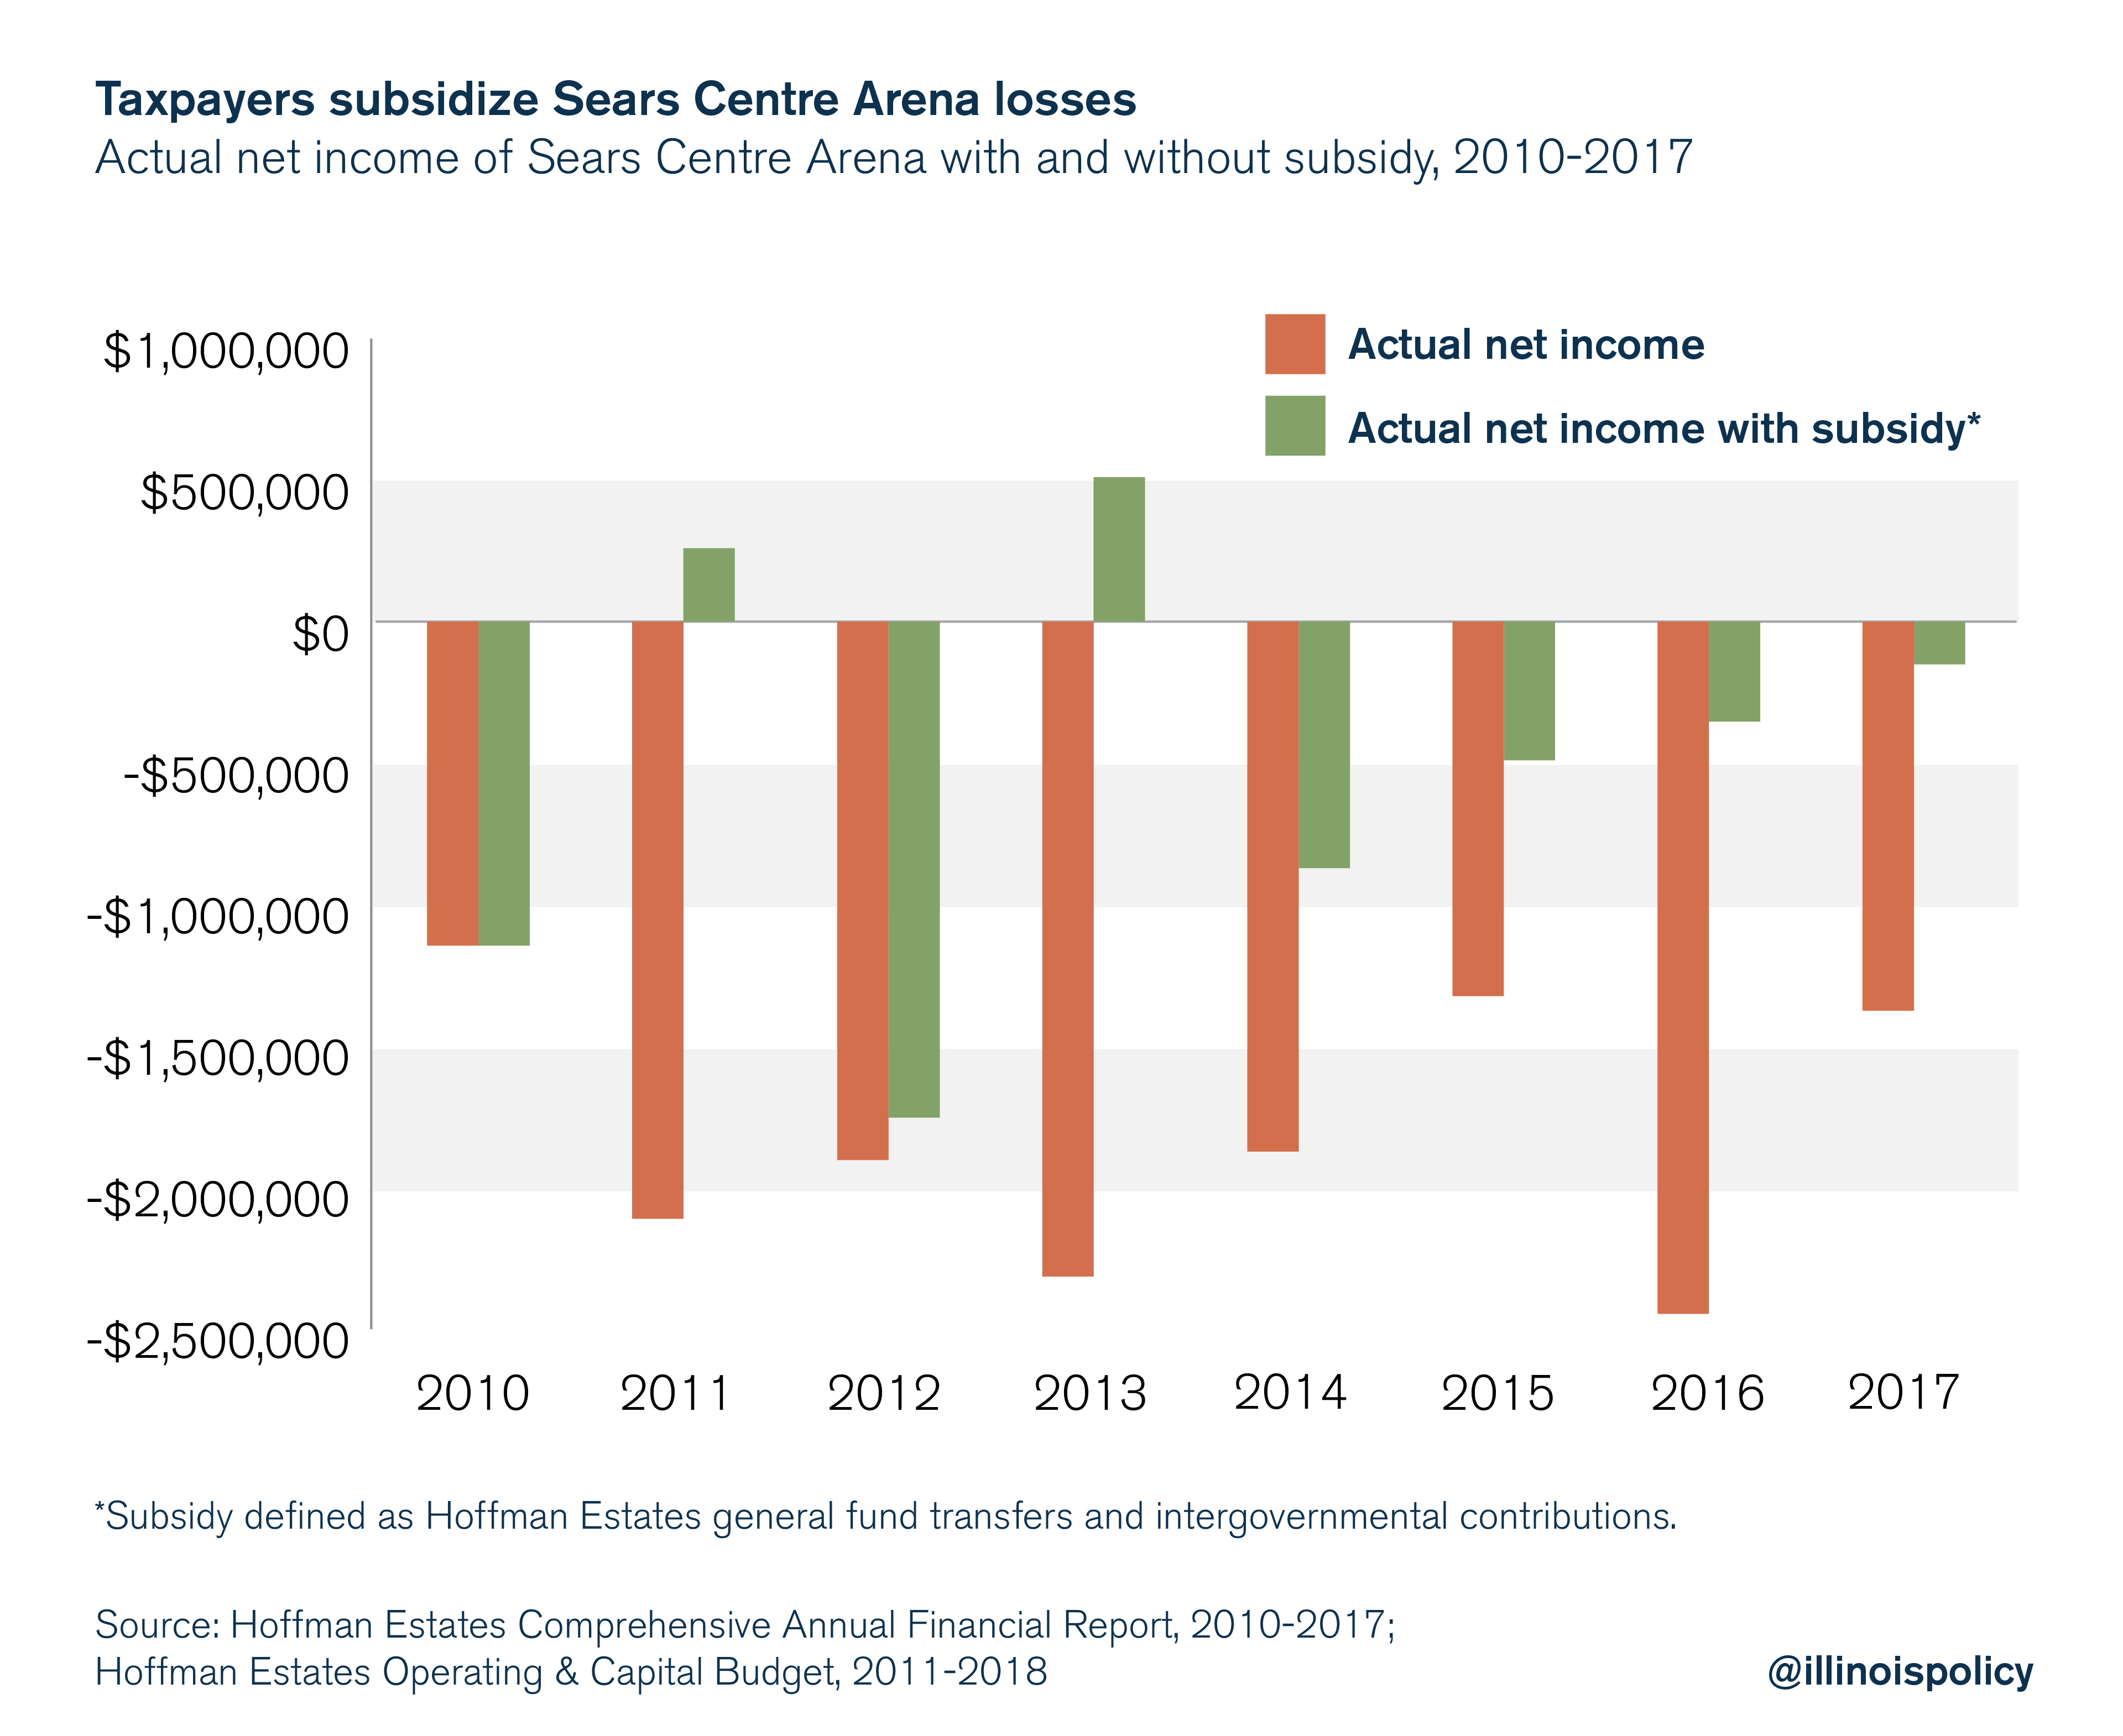 Taxpayers subsidize Sears Centre Arena losses